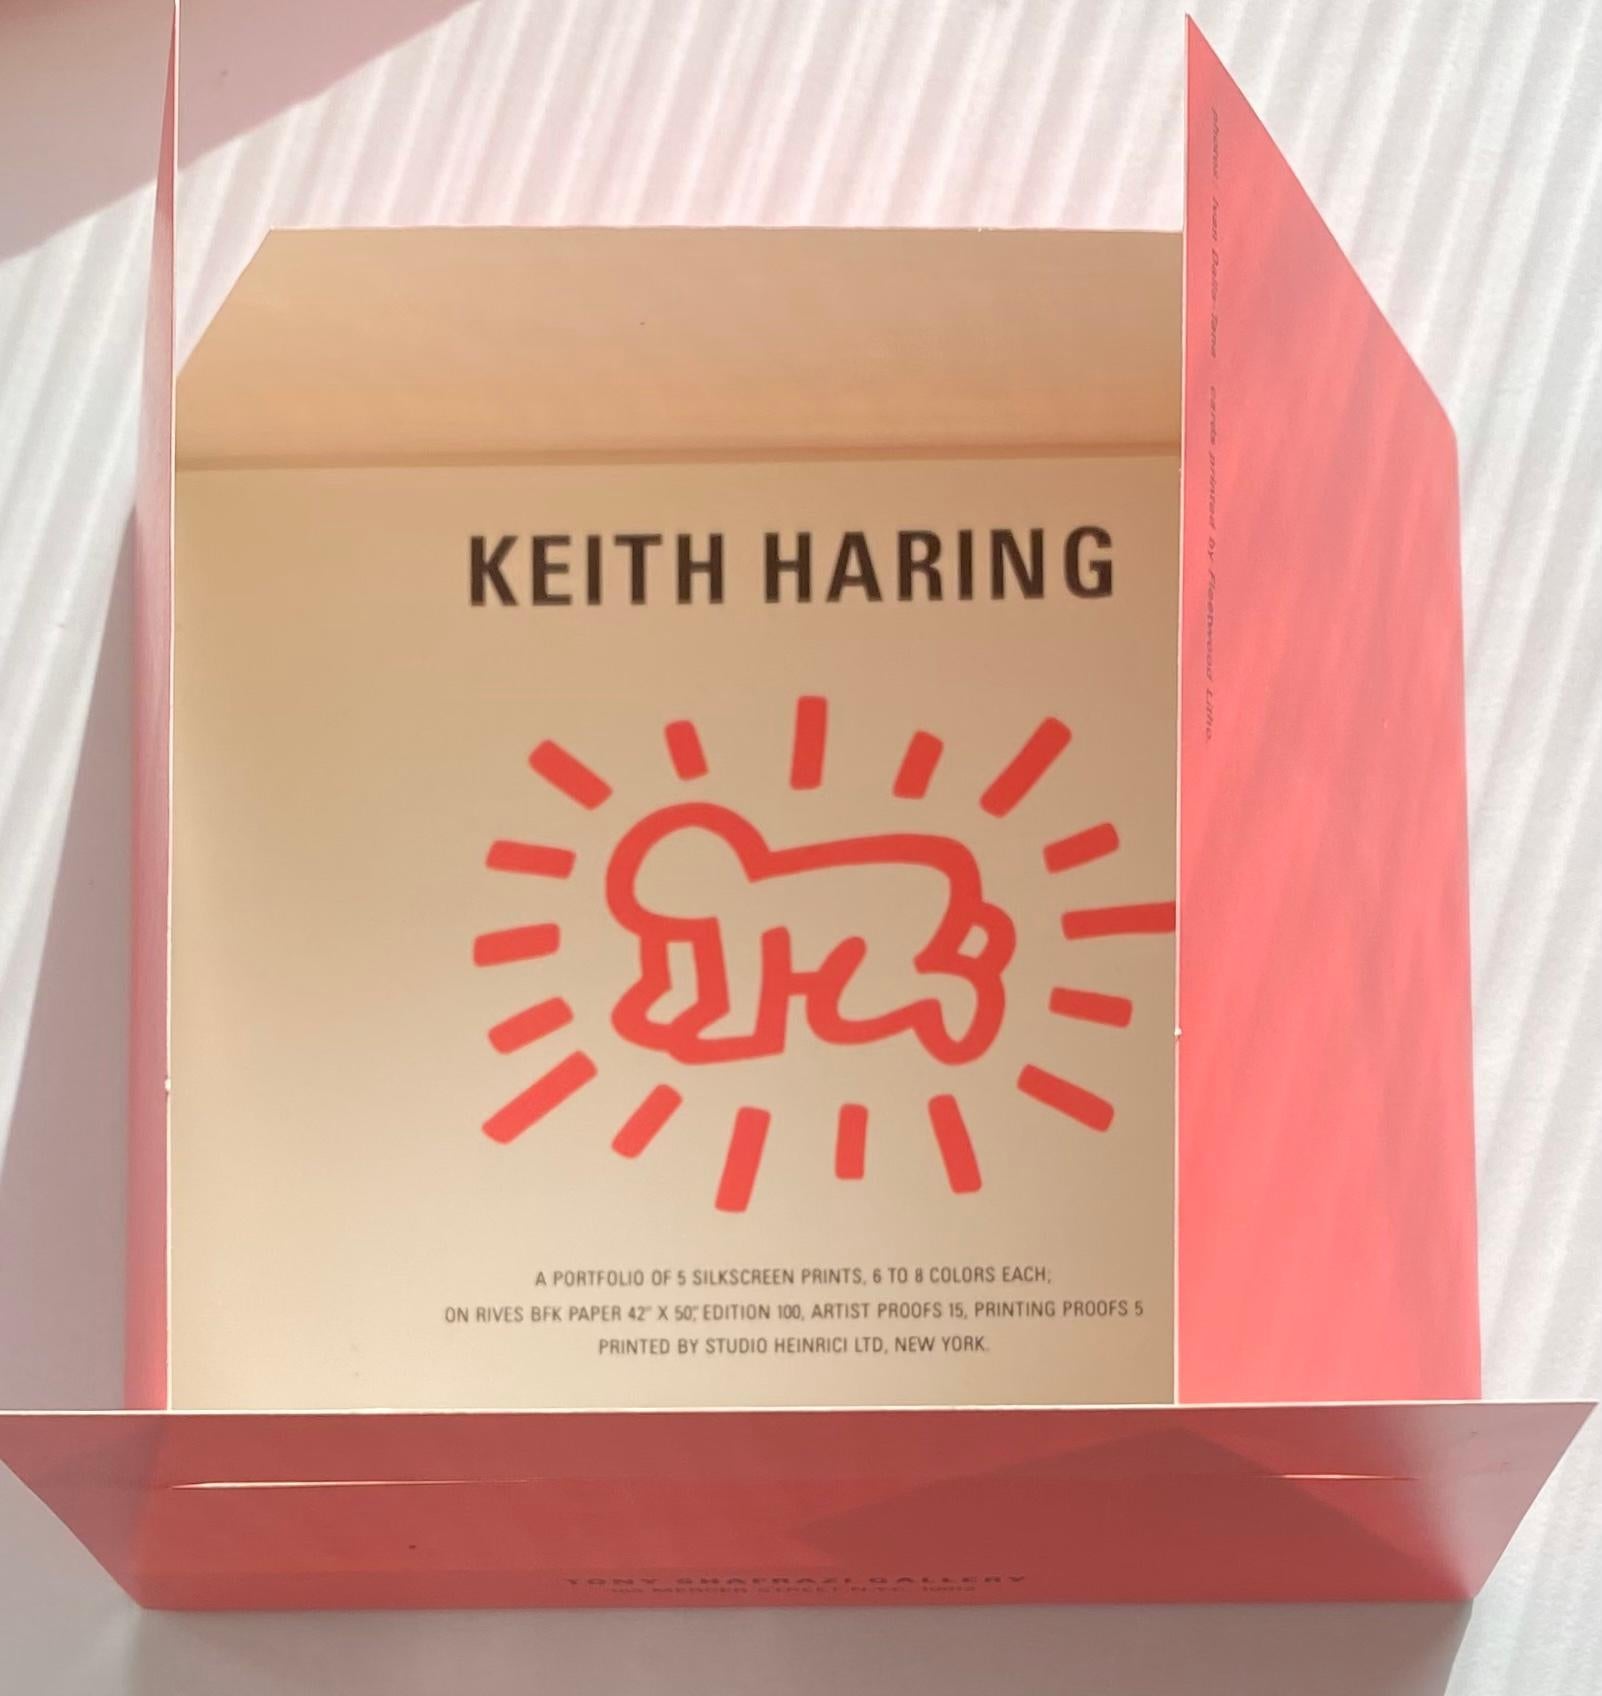 Keith Haring Fertility: set of 5 announcements 1983 (Keith Haring Tony Shafrazi) For Sale 7